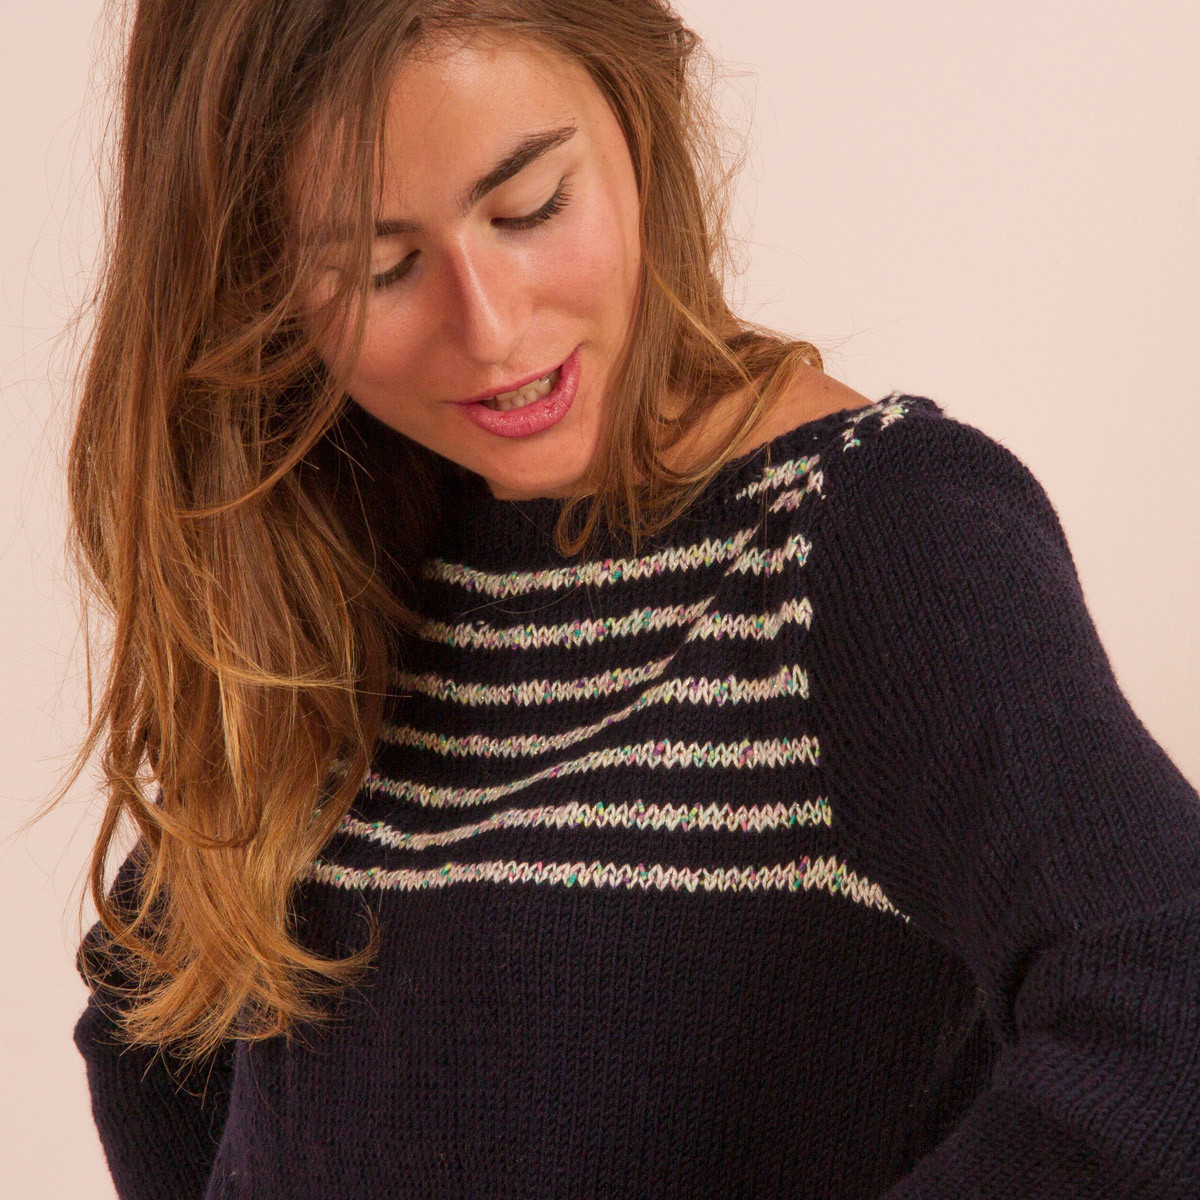 Natice ready-to-knit sweater